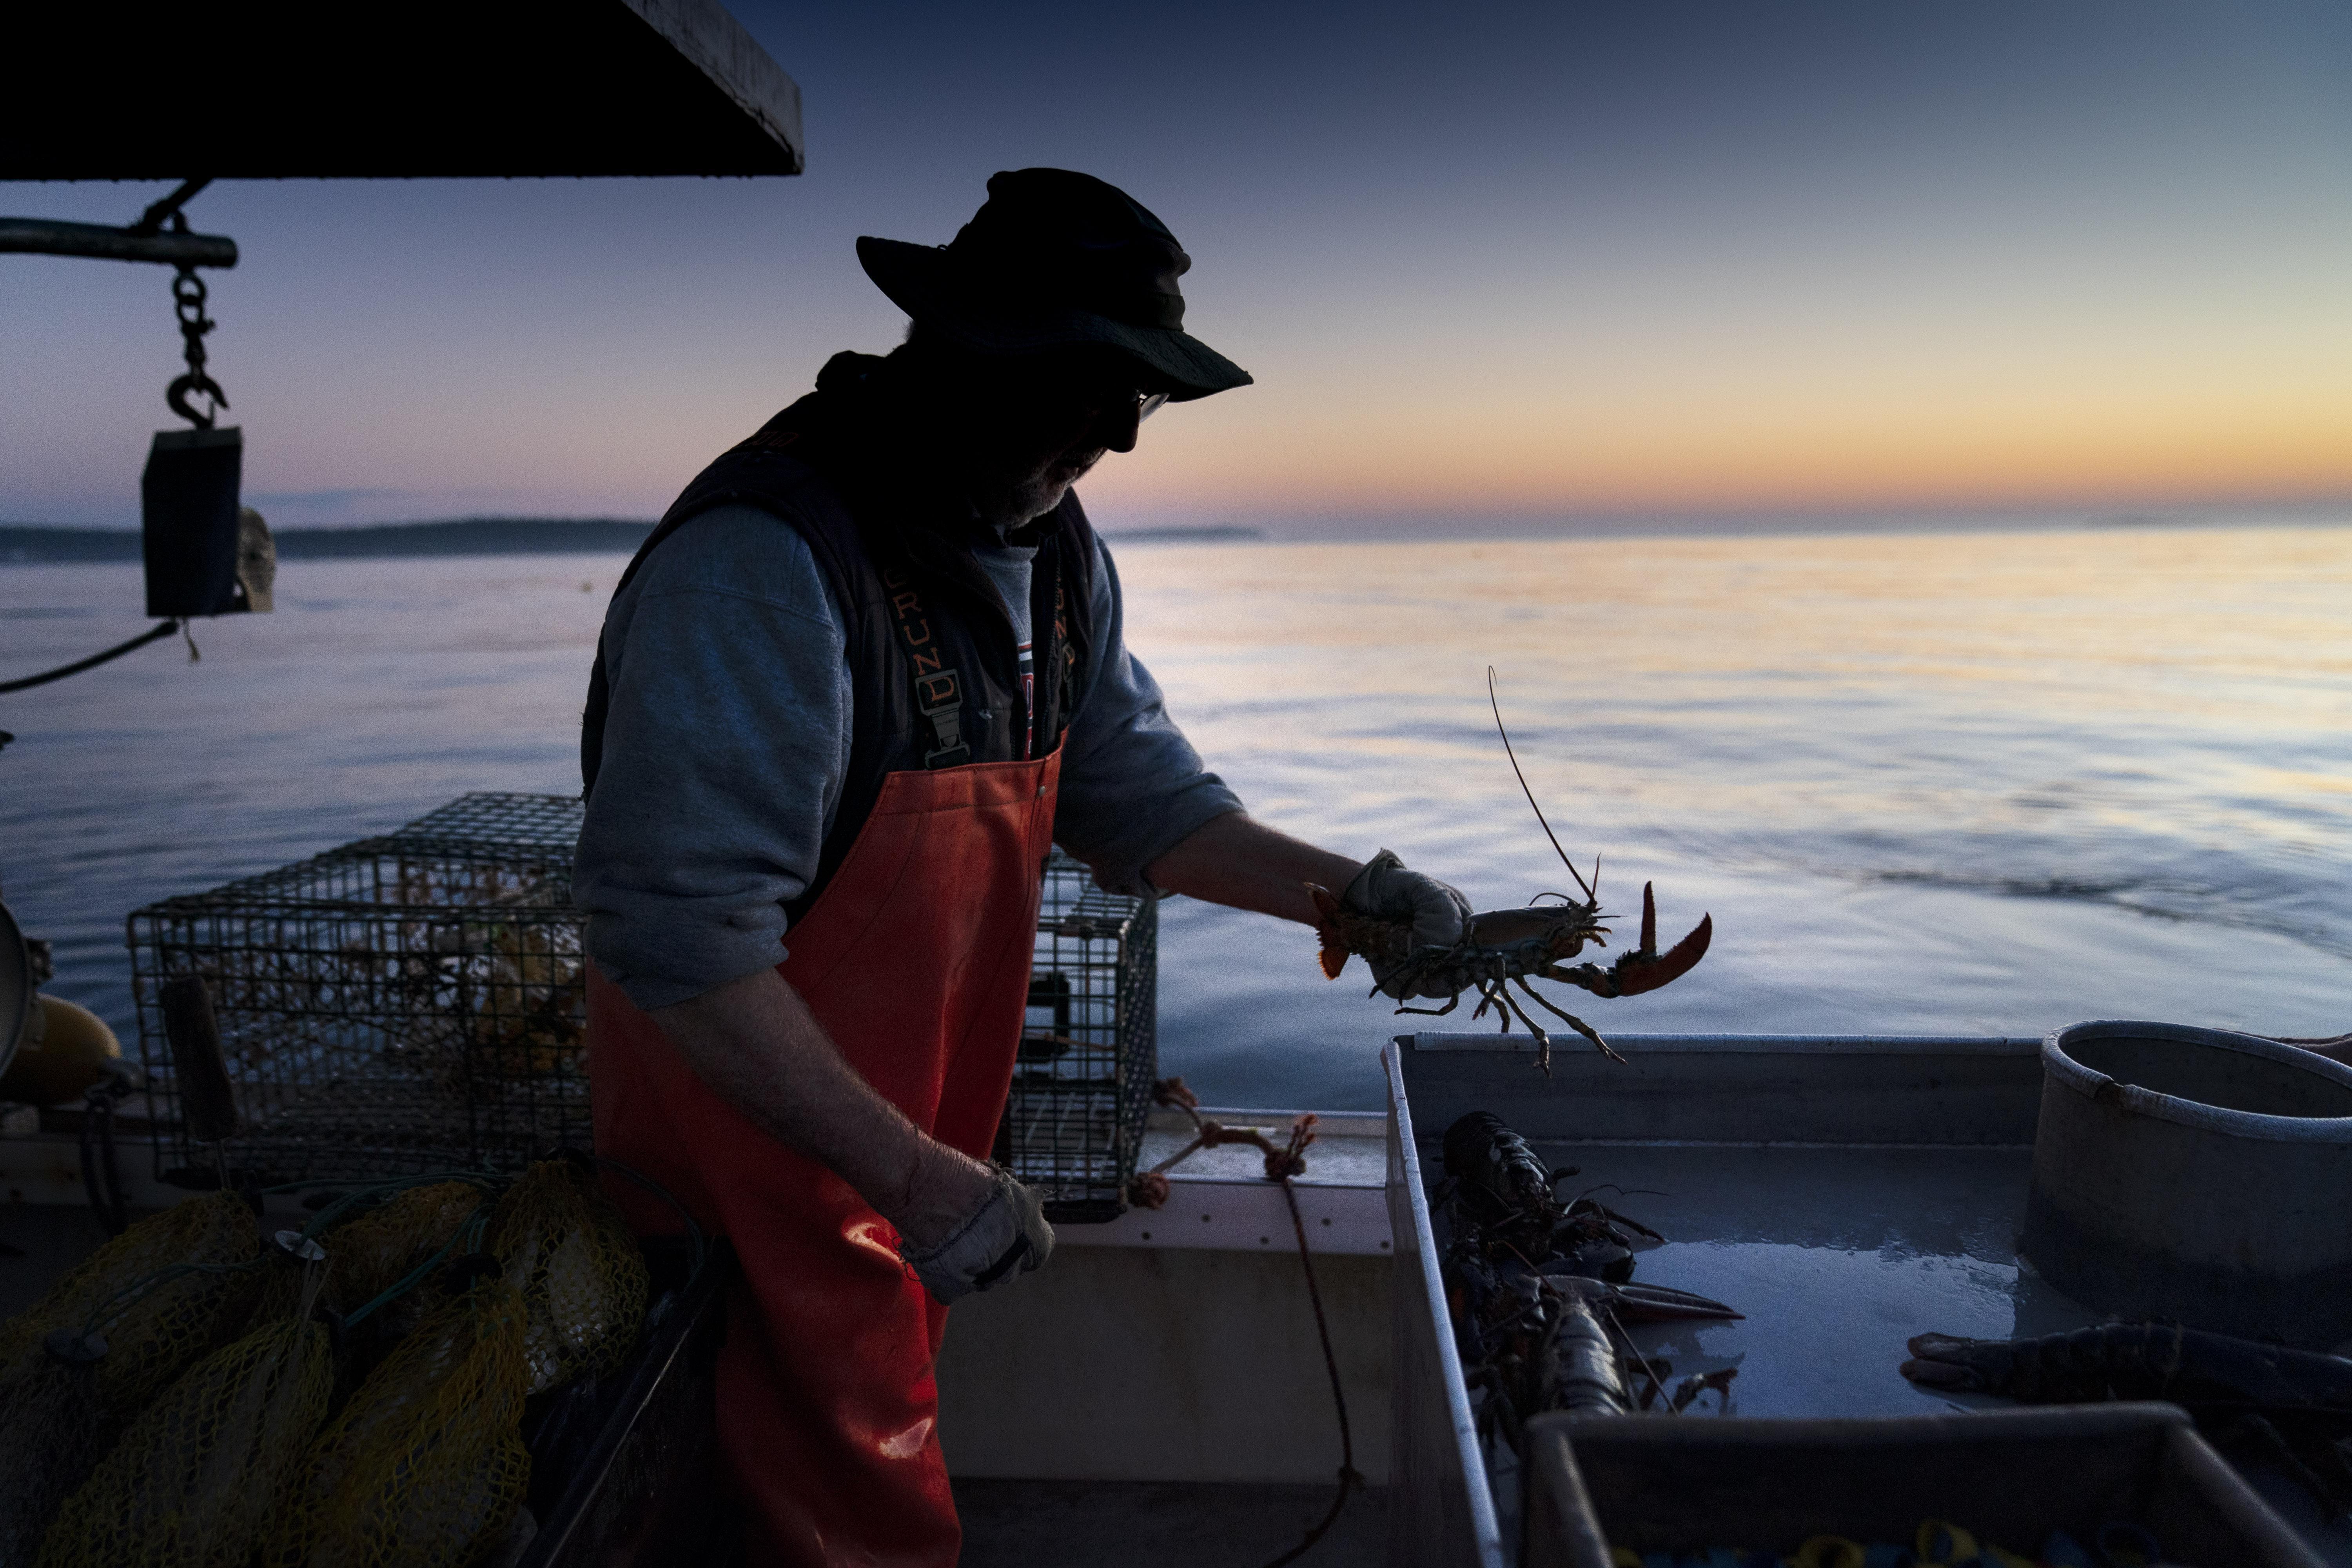 Lobster catch dips to lowest level since 2009 as fishers grapple with  climate change, whale rules - OPB